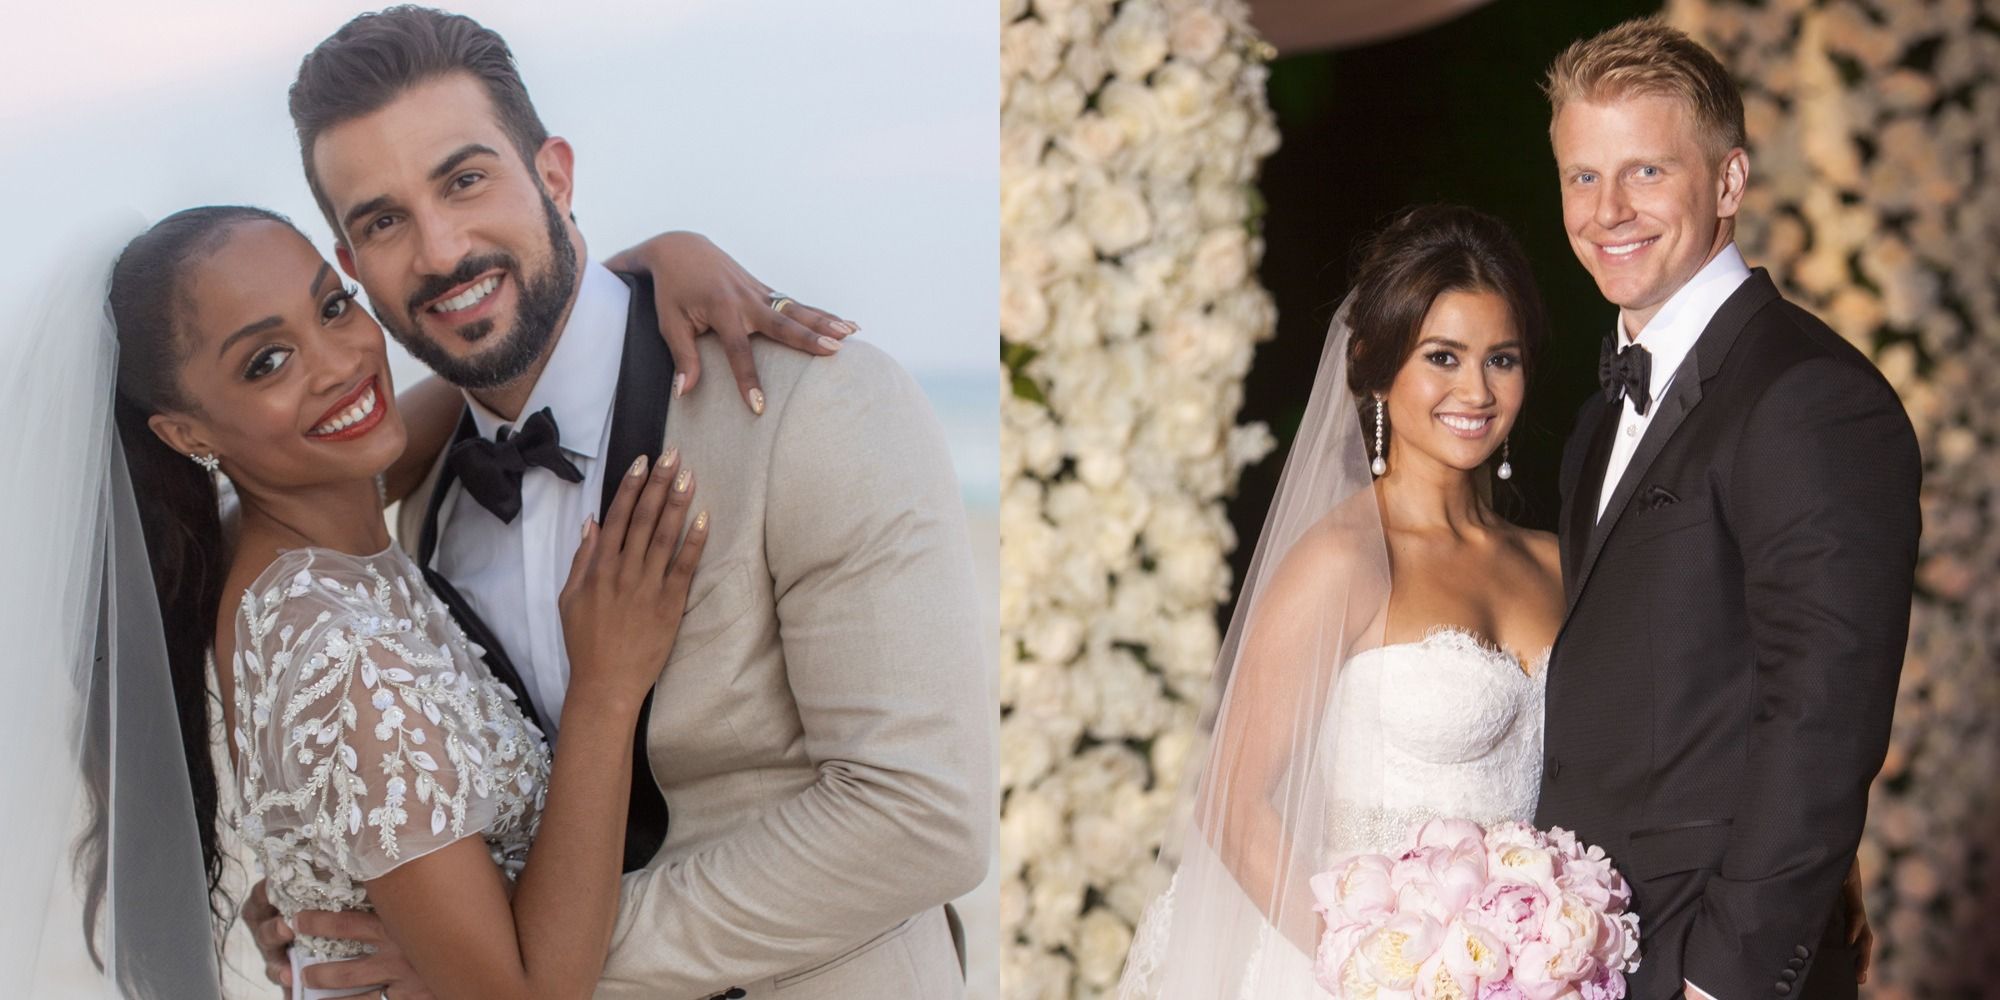 Split image showing the weddings of Rachel and Bryan and Sean and Catherine from Bachelor Nation